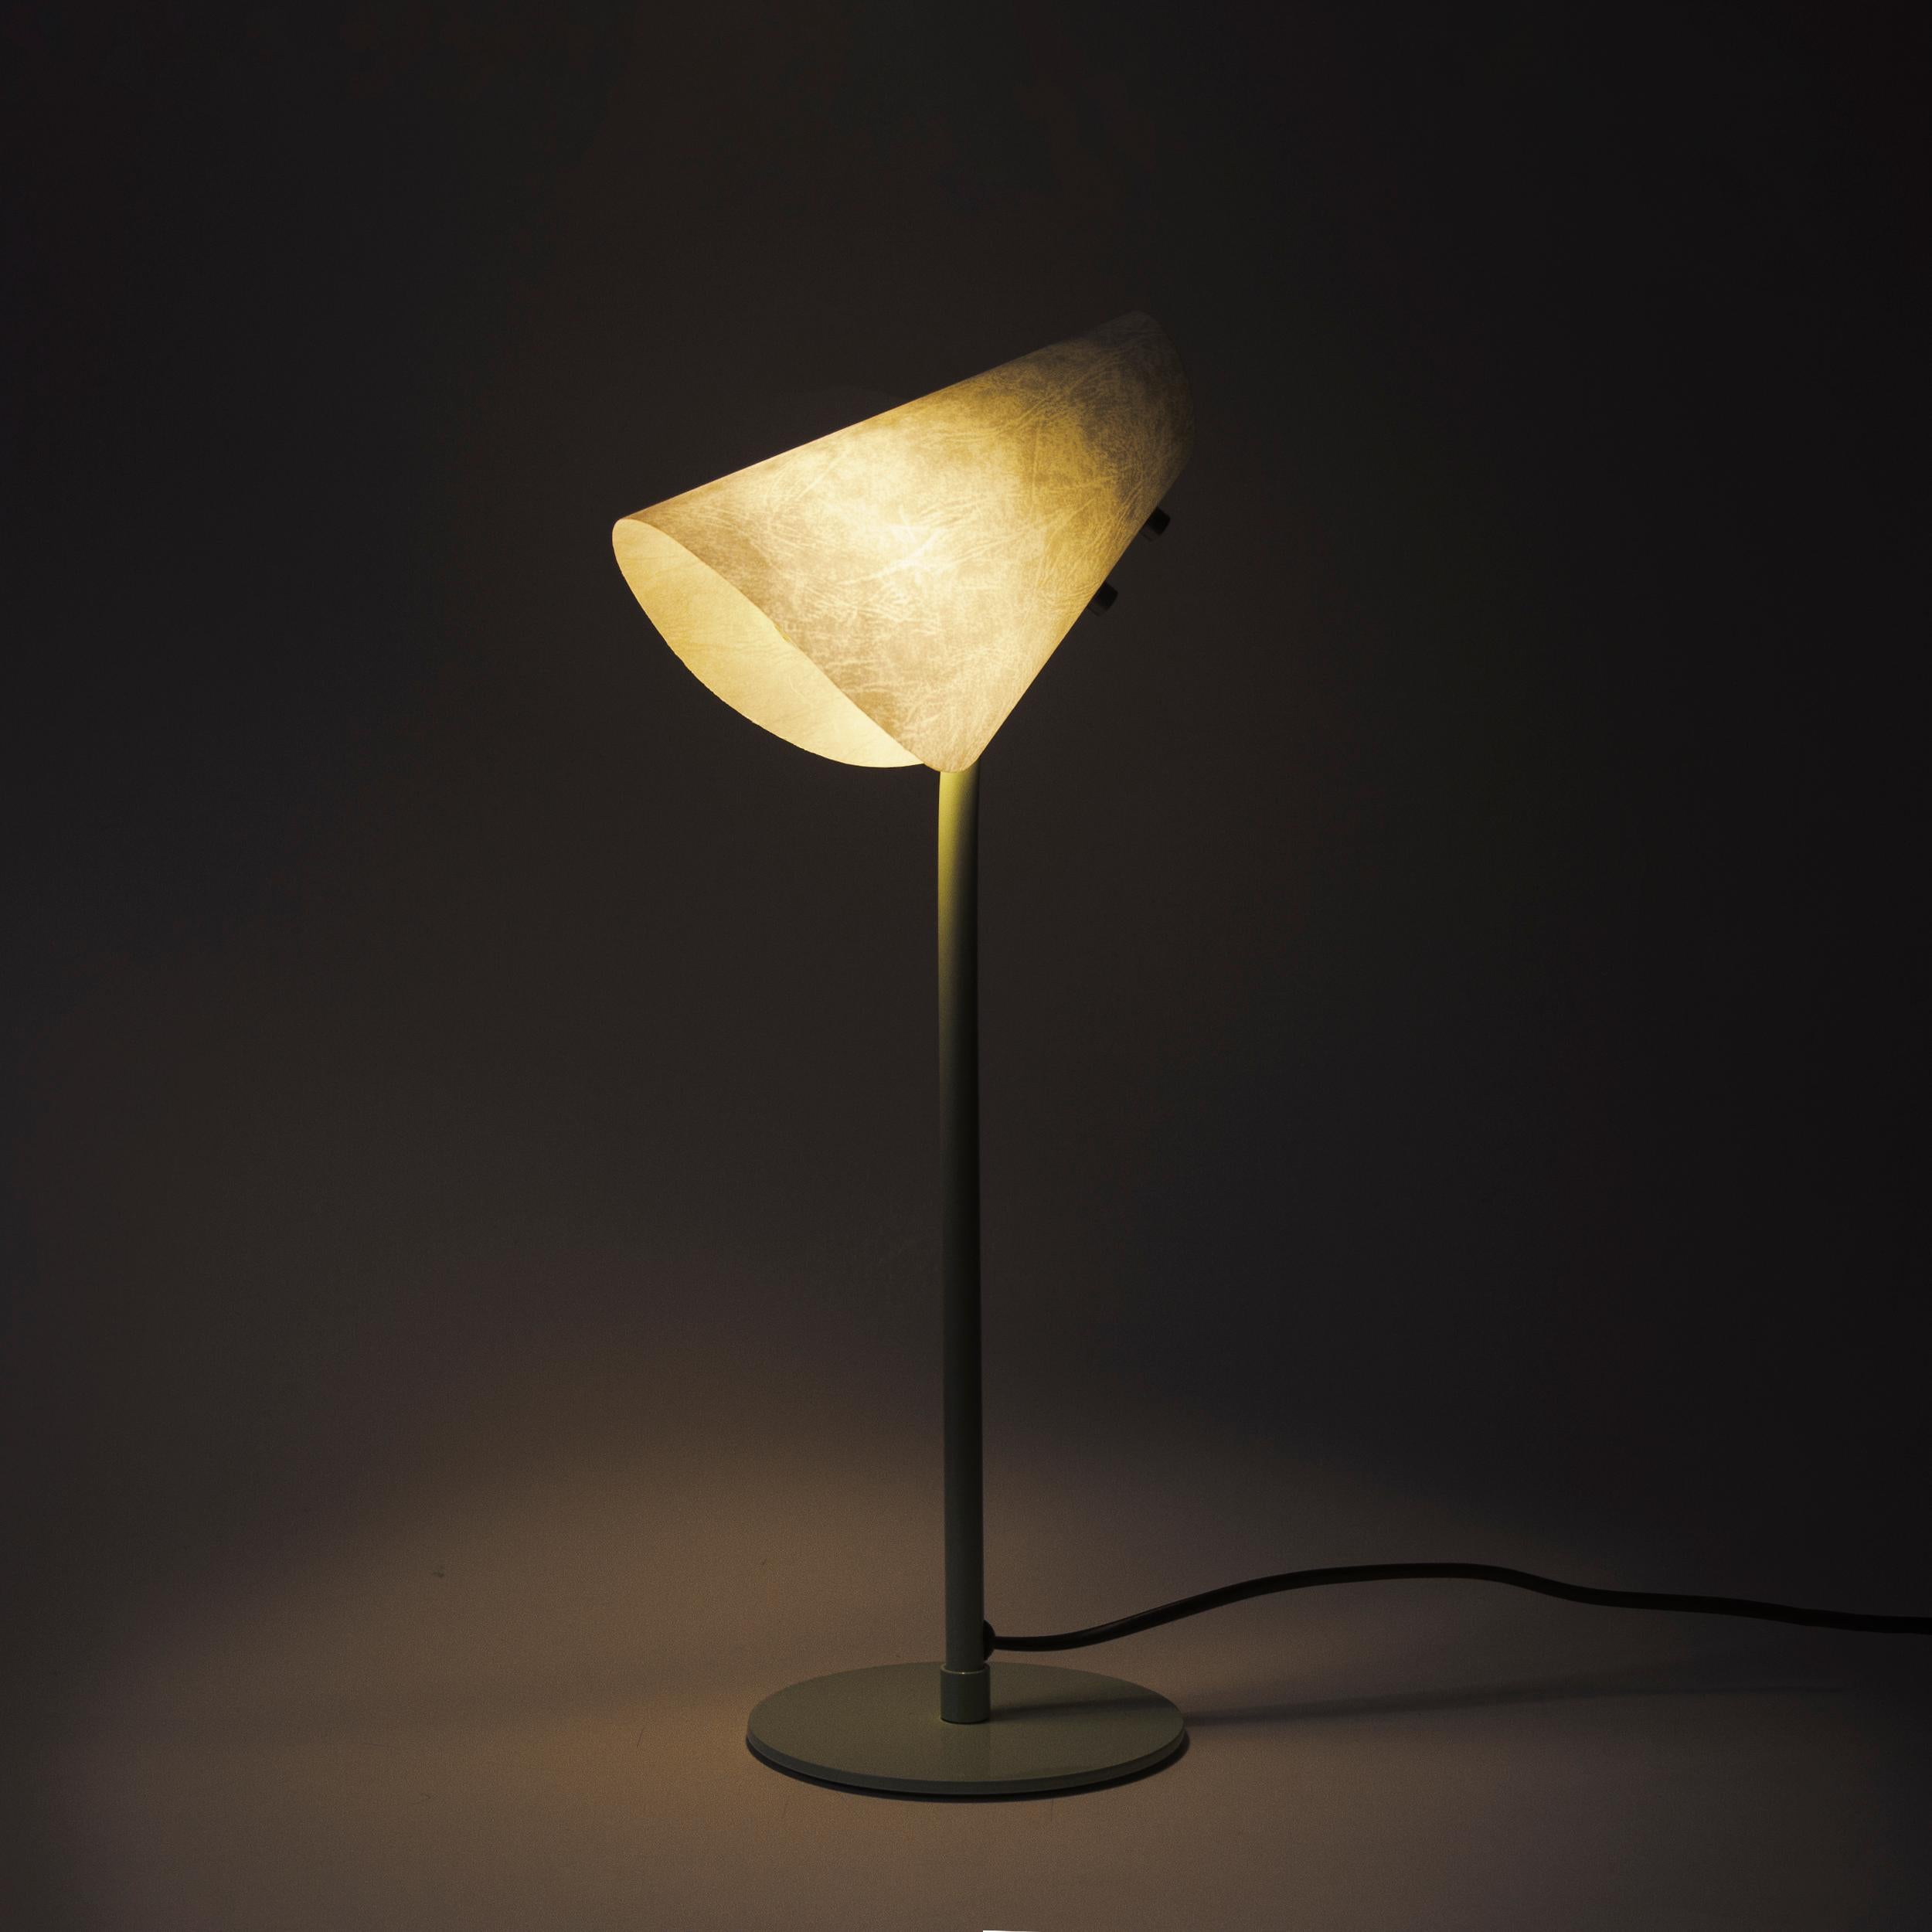 Modern Metal & Parchment Desk Lamp, Mint Green, June, Inspired by Handmaid's Tale